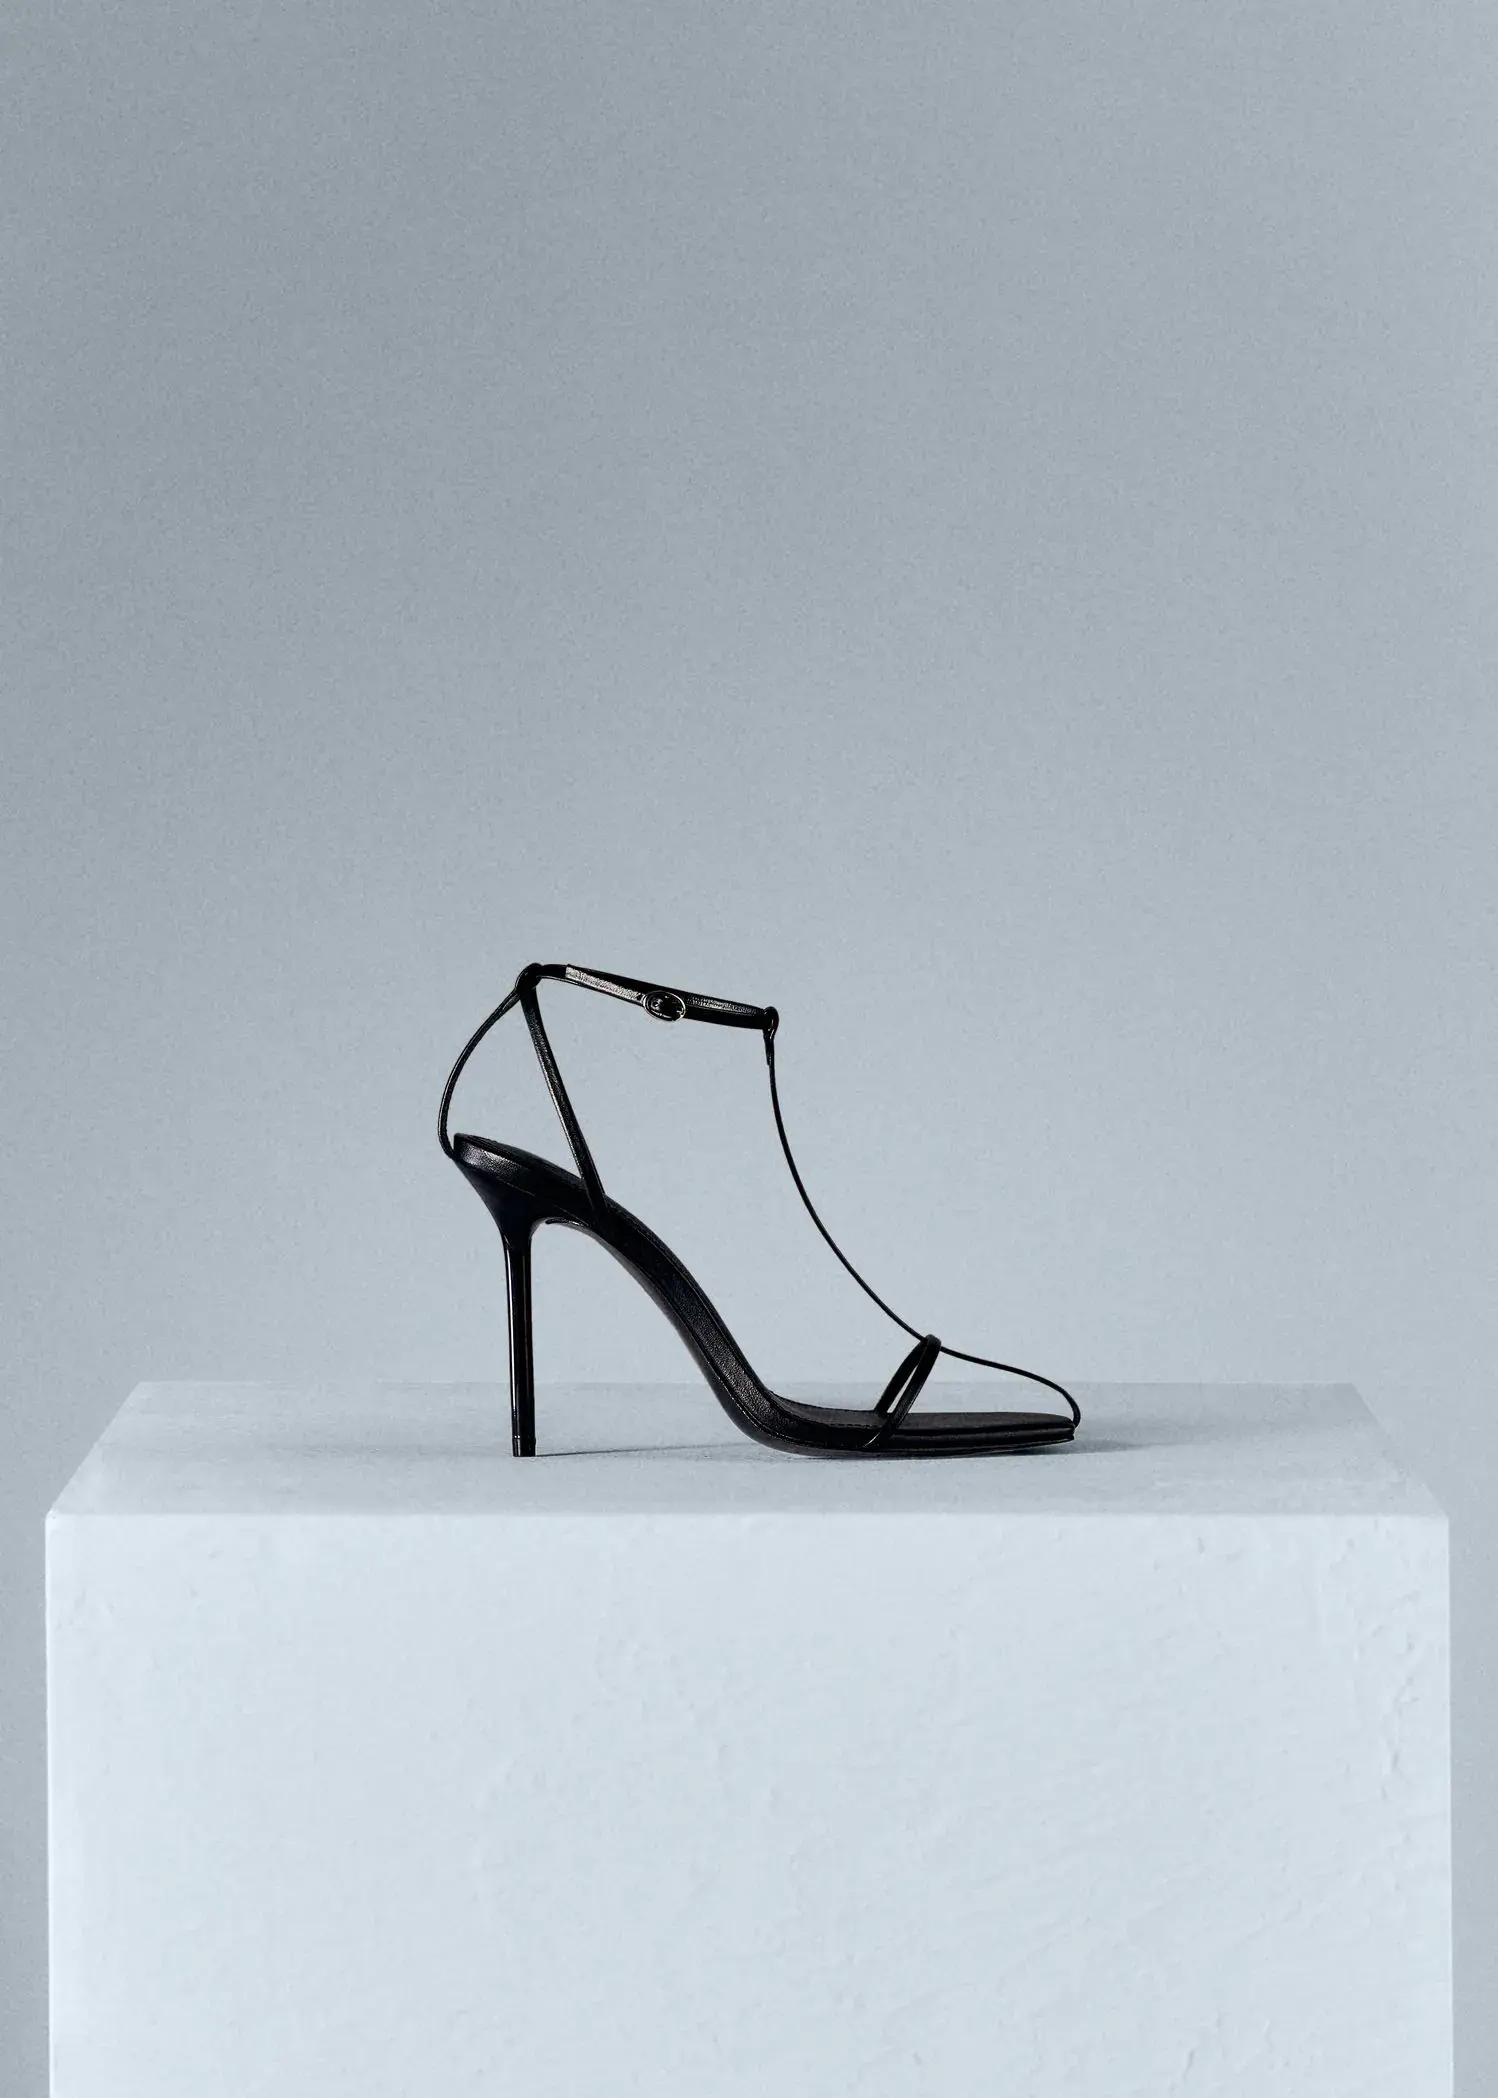 Mango Straps heel leather sandals. a pair of black high heels sitting on top of a box. 